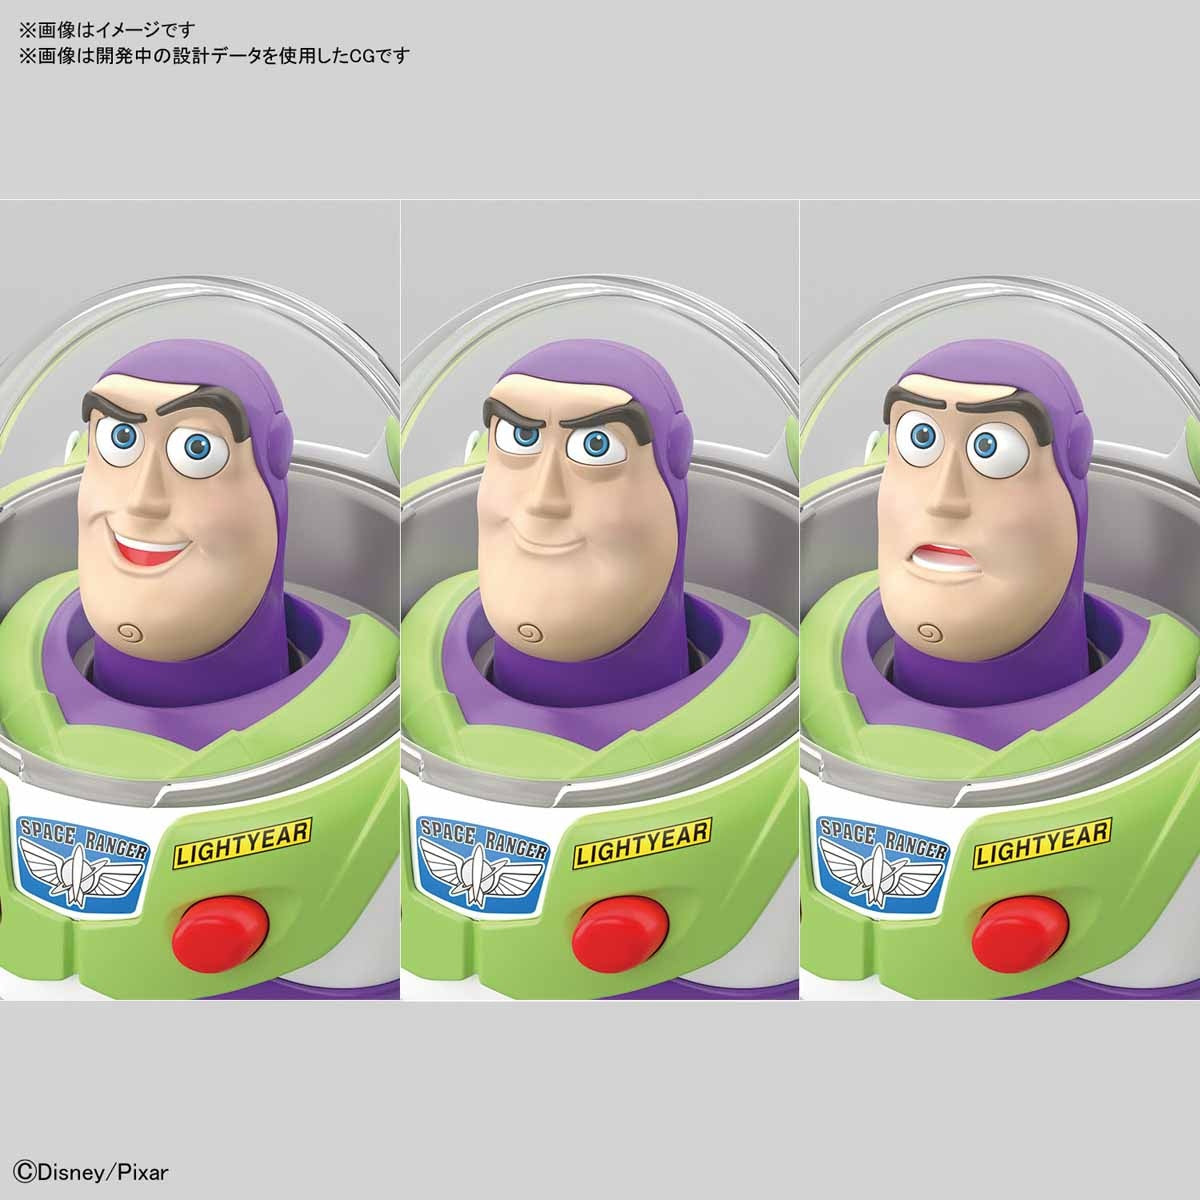 Toy Story 4 Plastic Model Collection &quot;Buzz Lightyear&quot;-Bandai-Ace Cards &amp; Collectibles